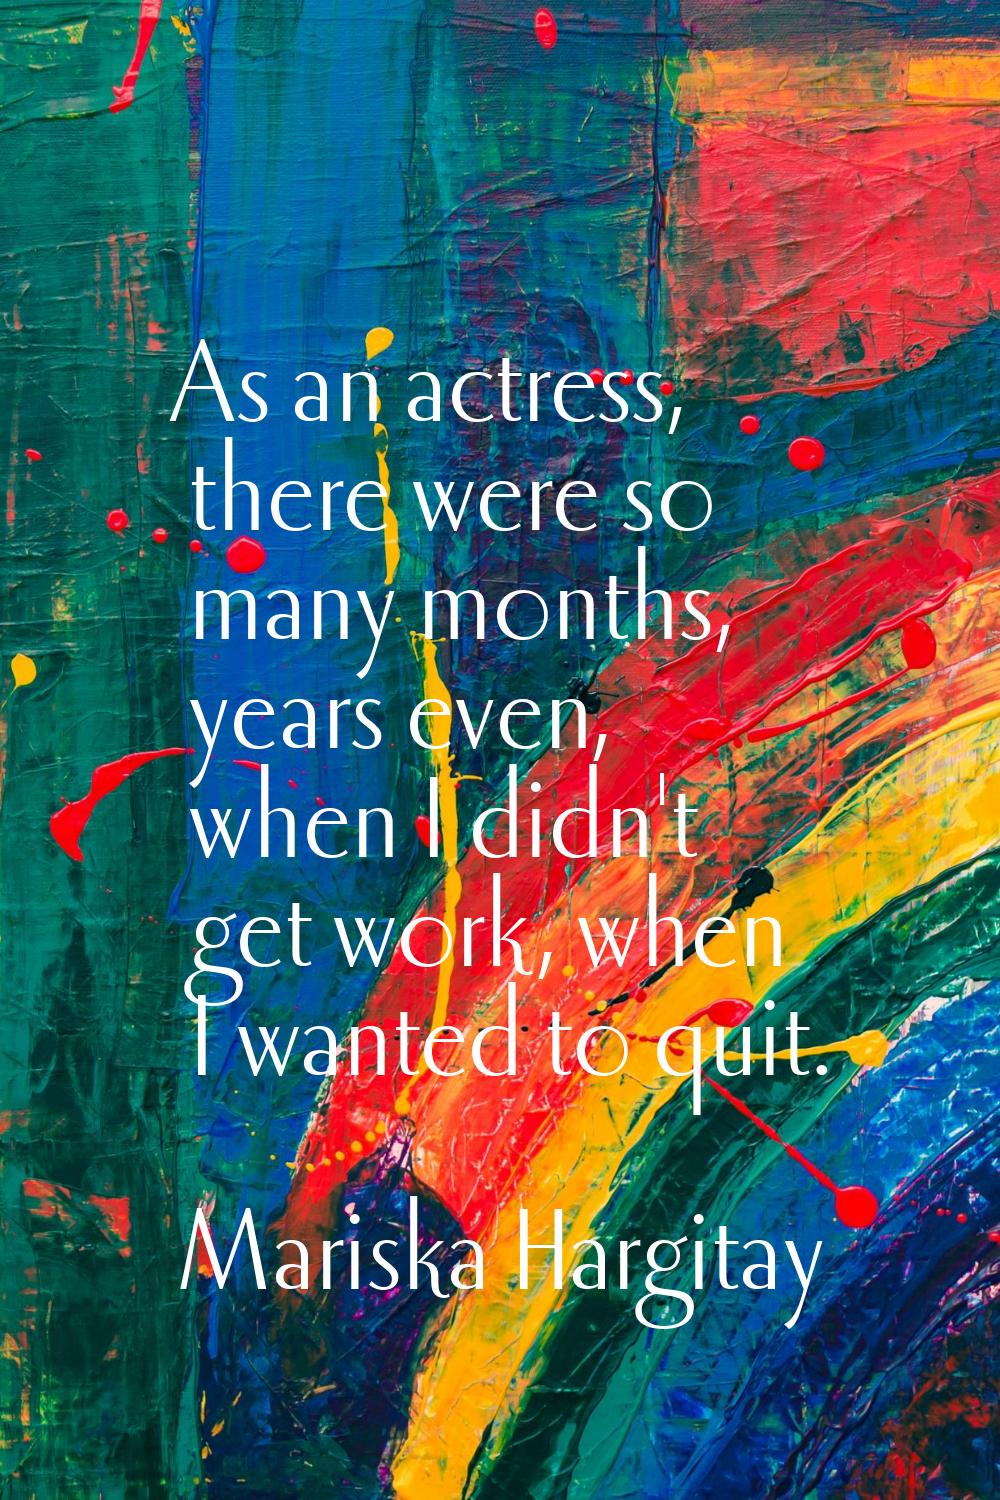 As an actress, there were so many months, years even, when I didn't get work, when I wanted to quit